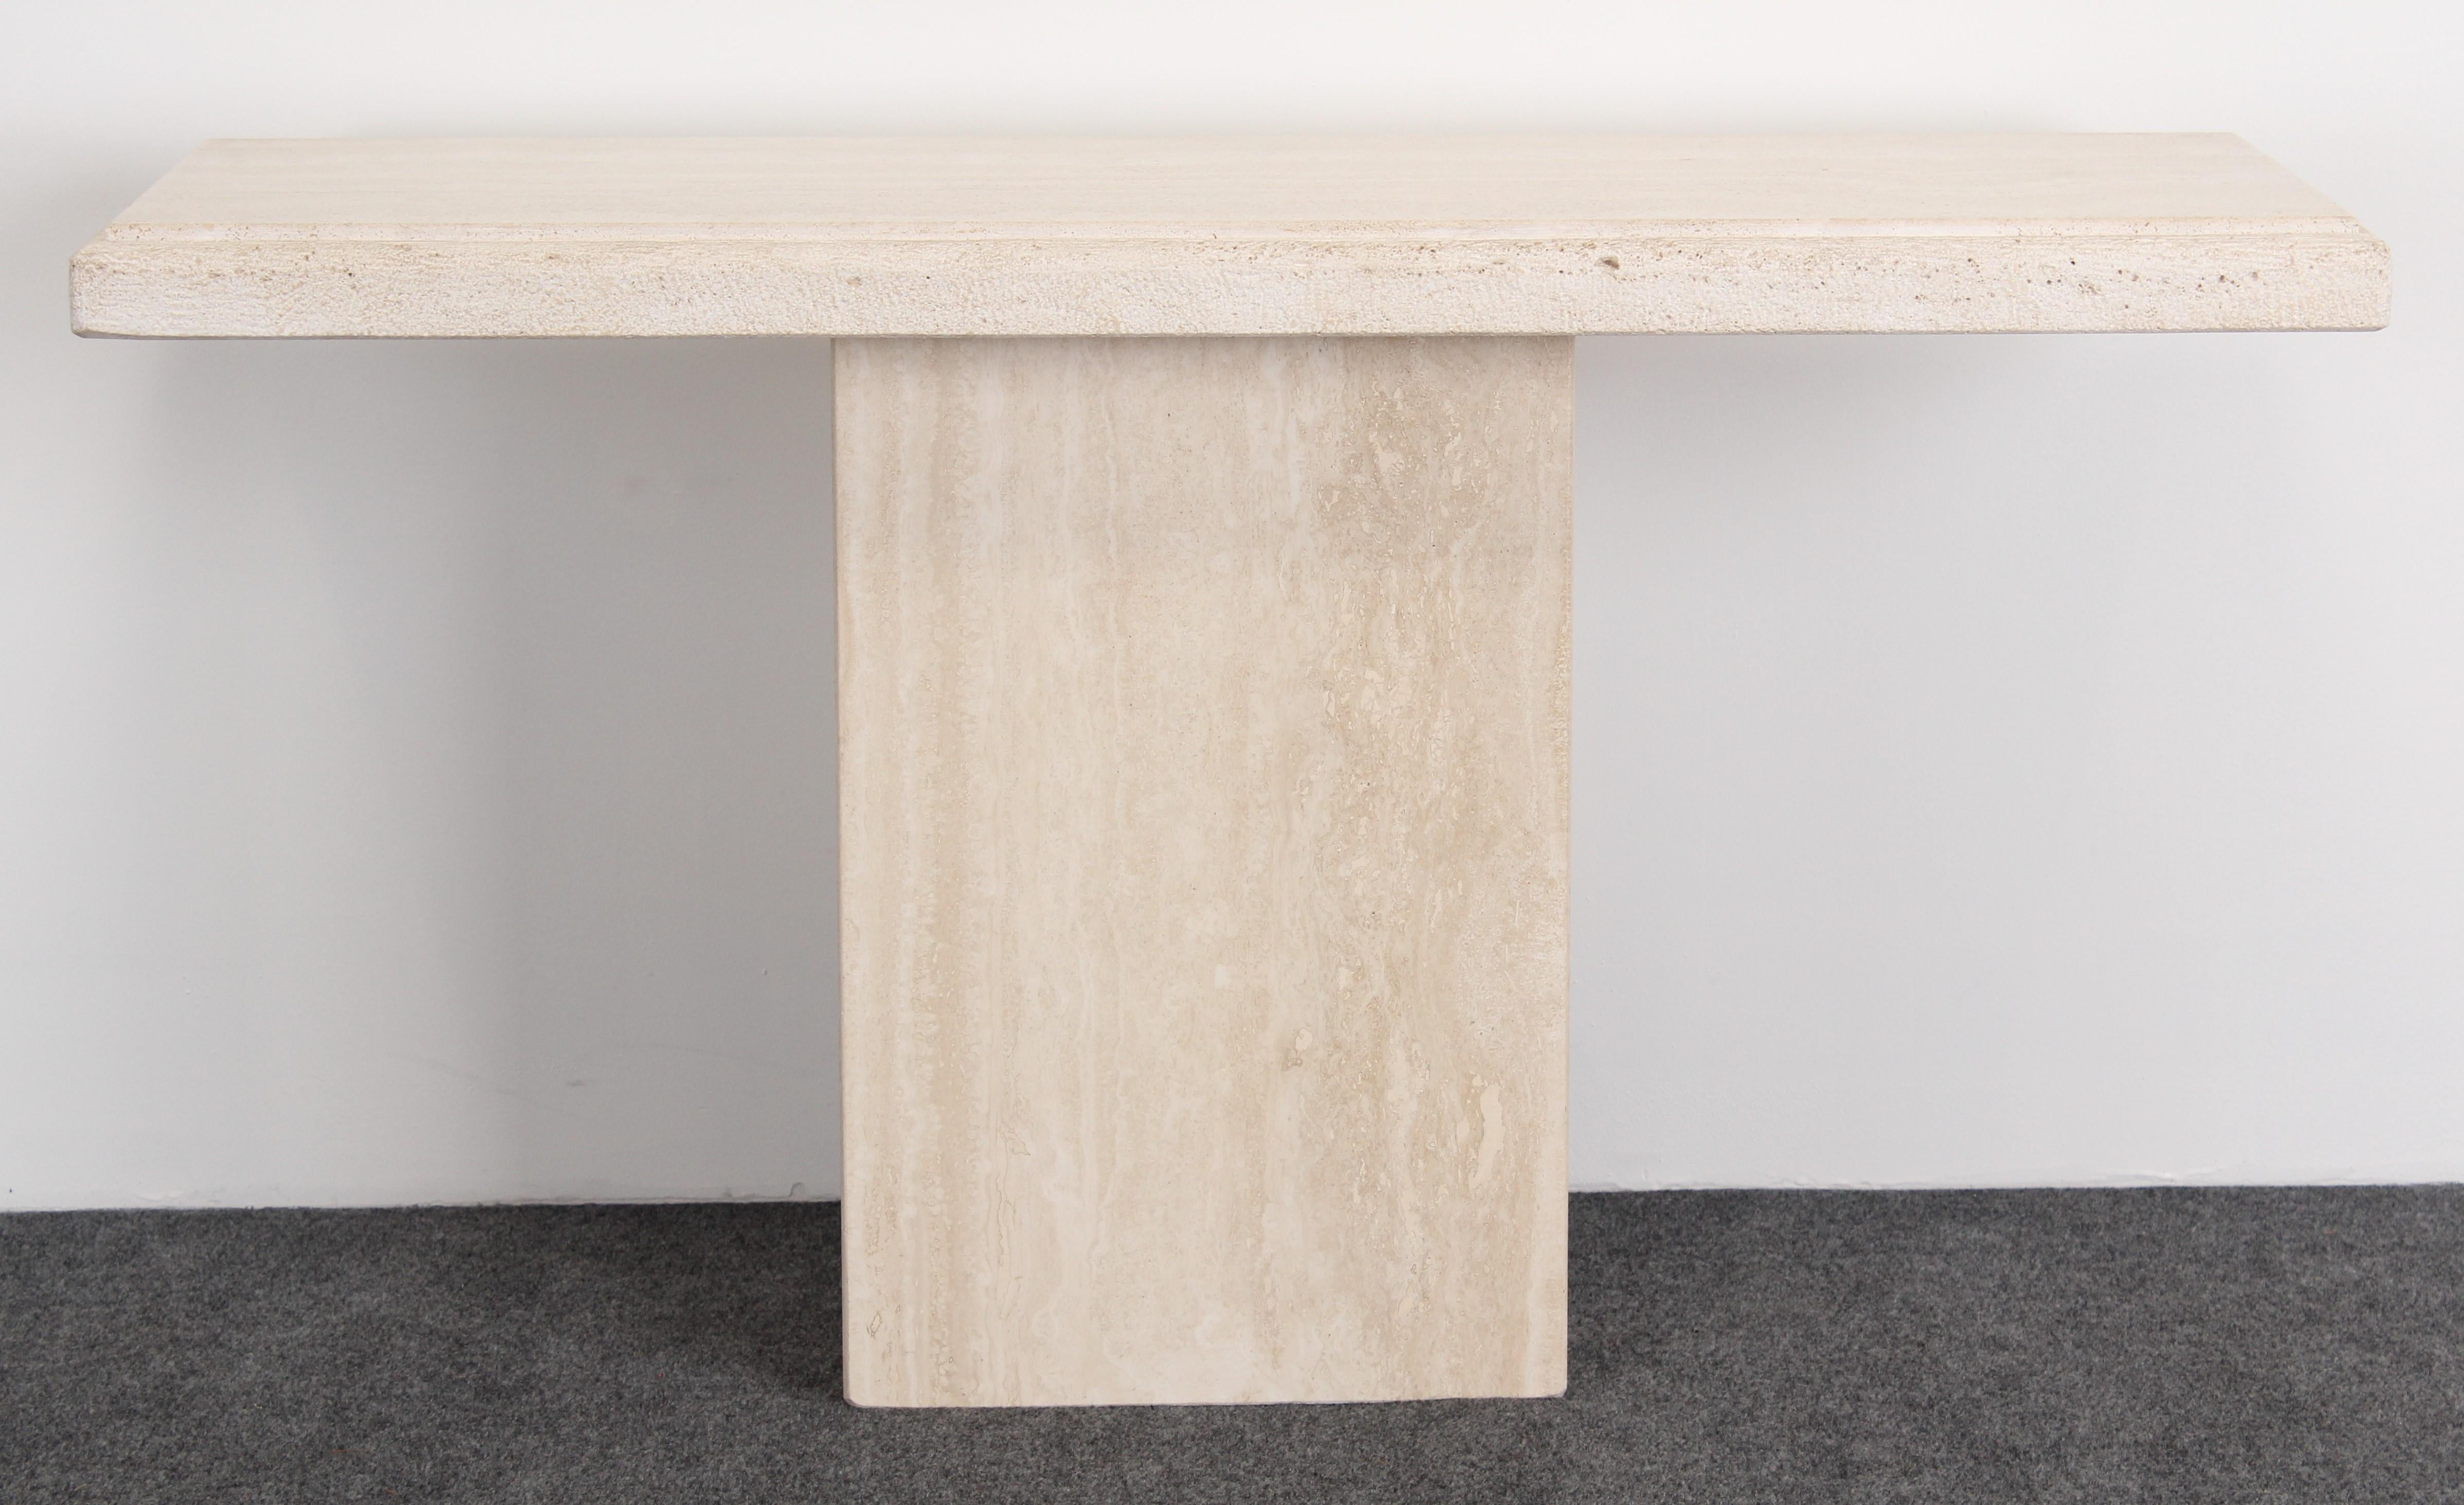 A beautiful solid travertine marble console table. Sturdy and functional for any interior space. Great condition with age appropriate wear.